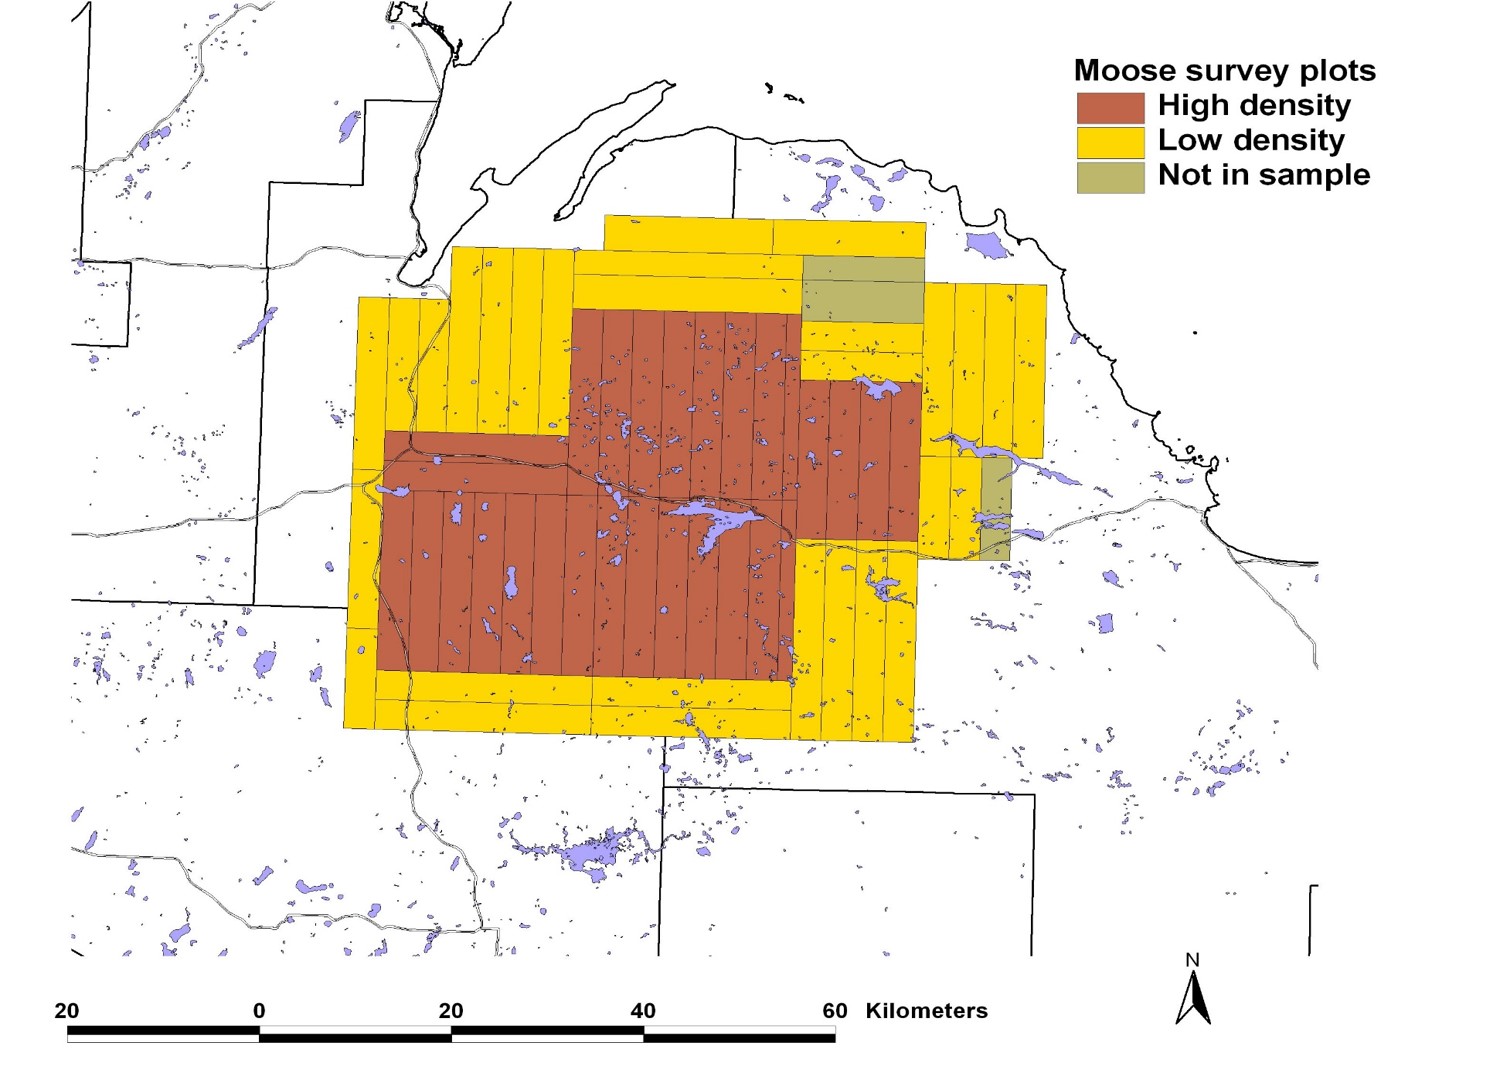 DNR reports moose survey results